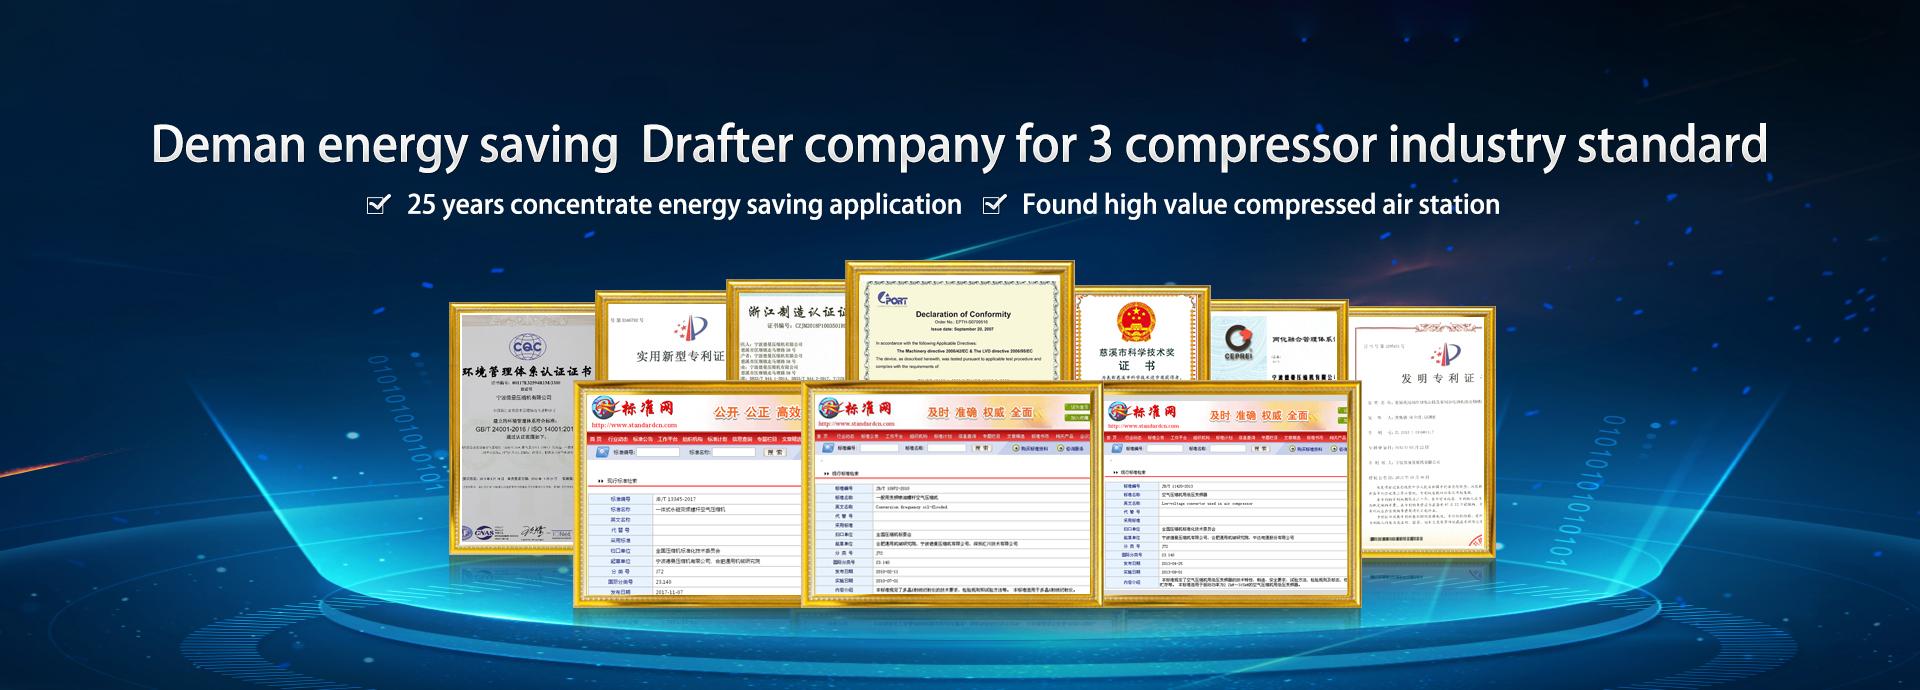 Deman energy saving  Drafter company for 3 compressor industry standard